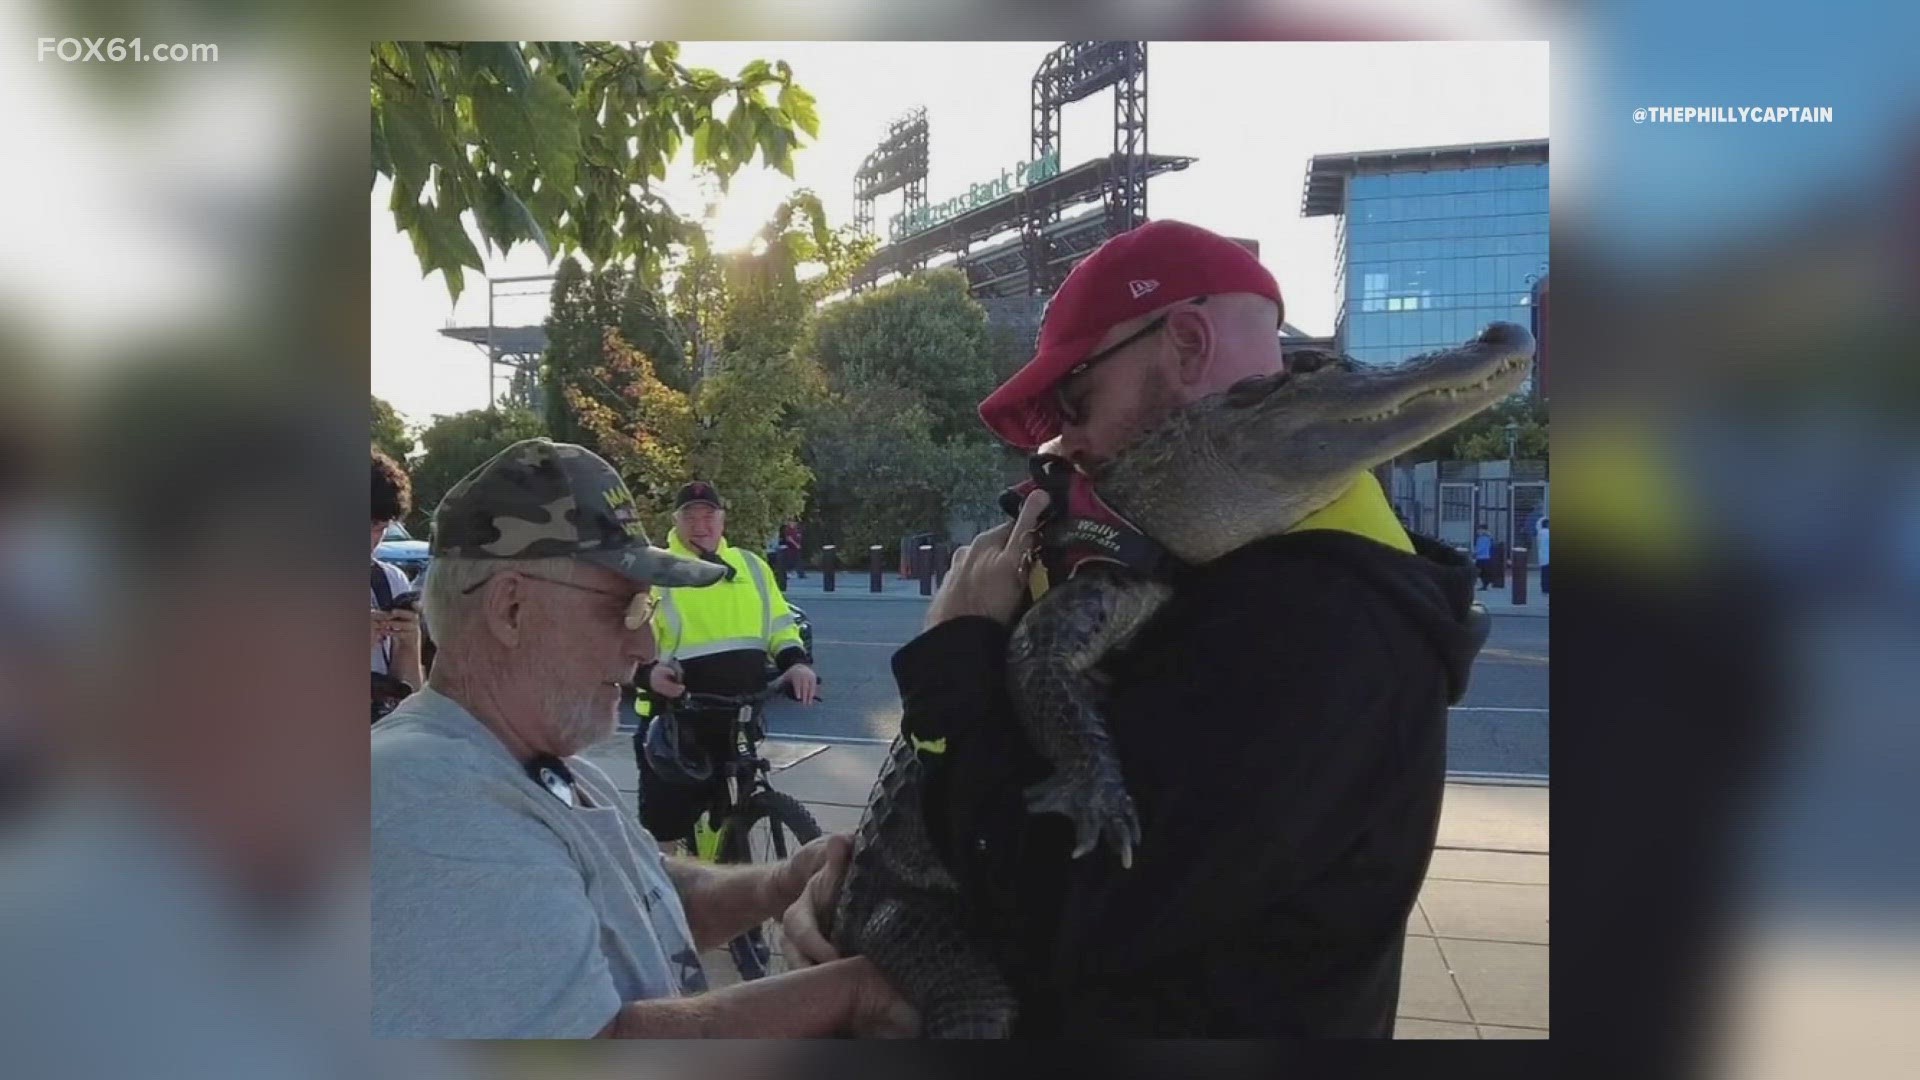 The owner says that the alligator helps him battle depression and that it loves to give hugs.